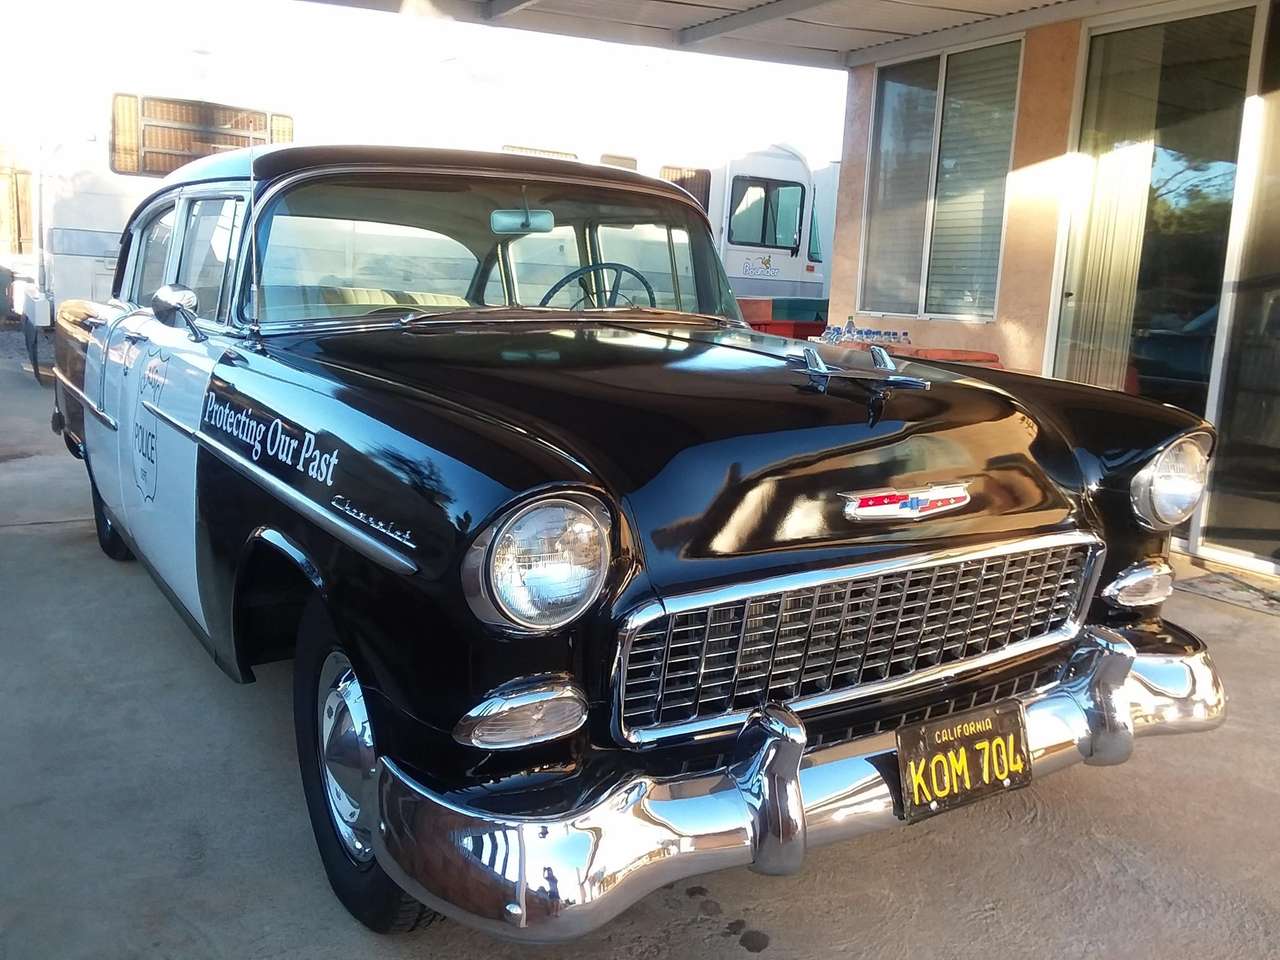 1955 chevy police car puzzle online from photo